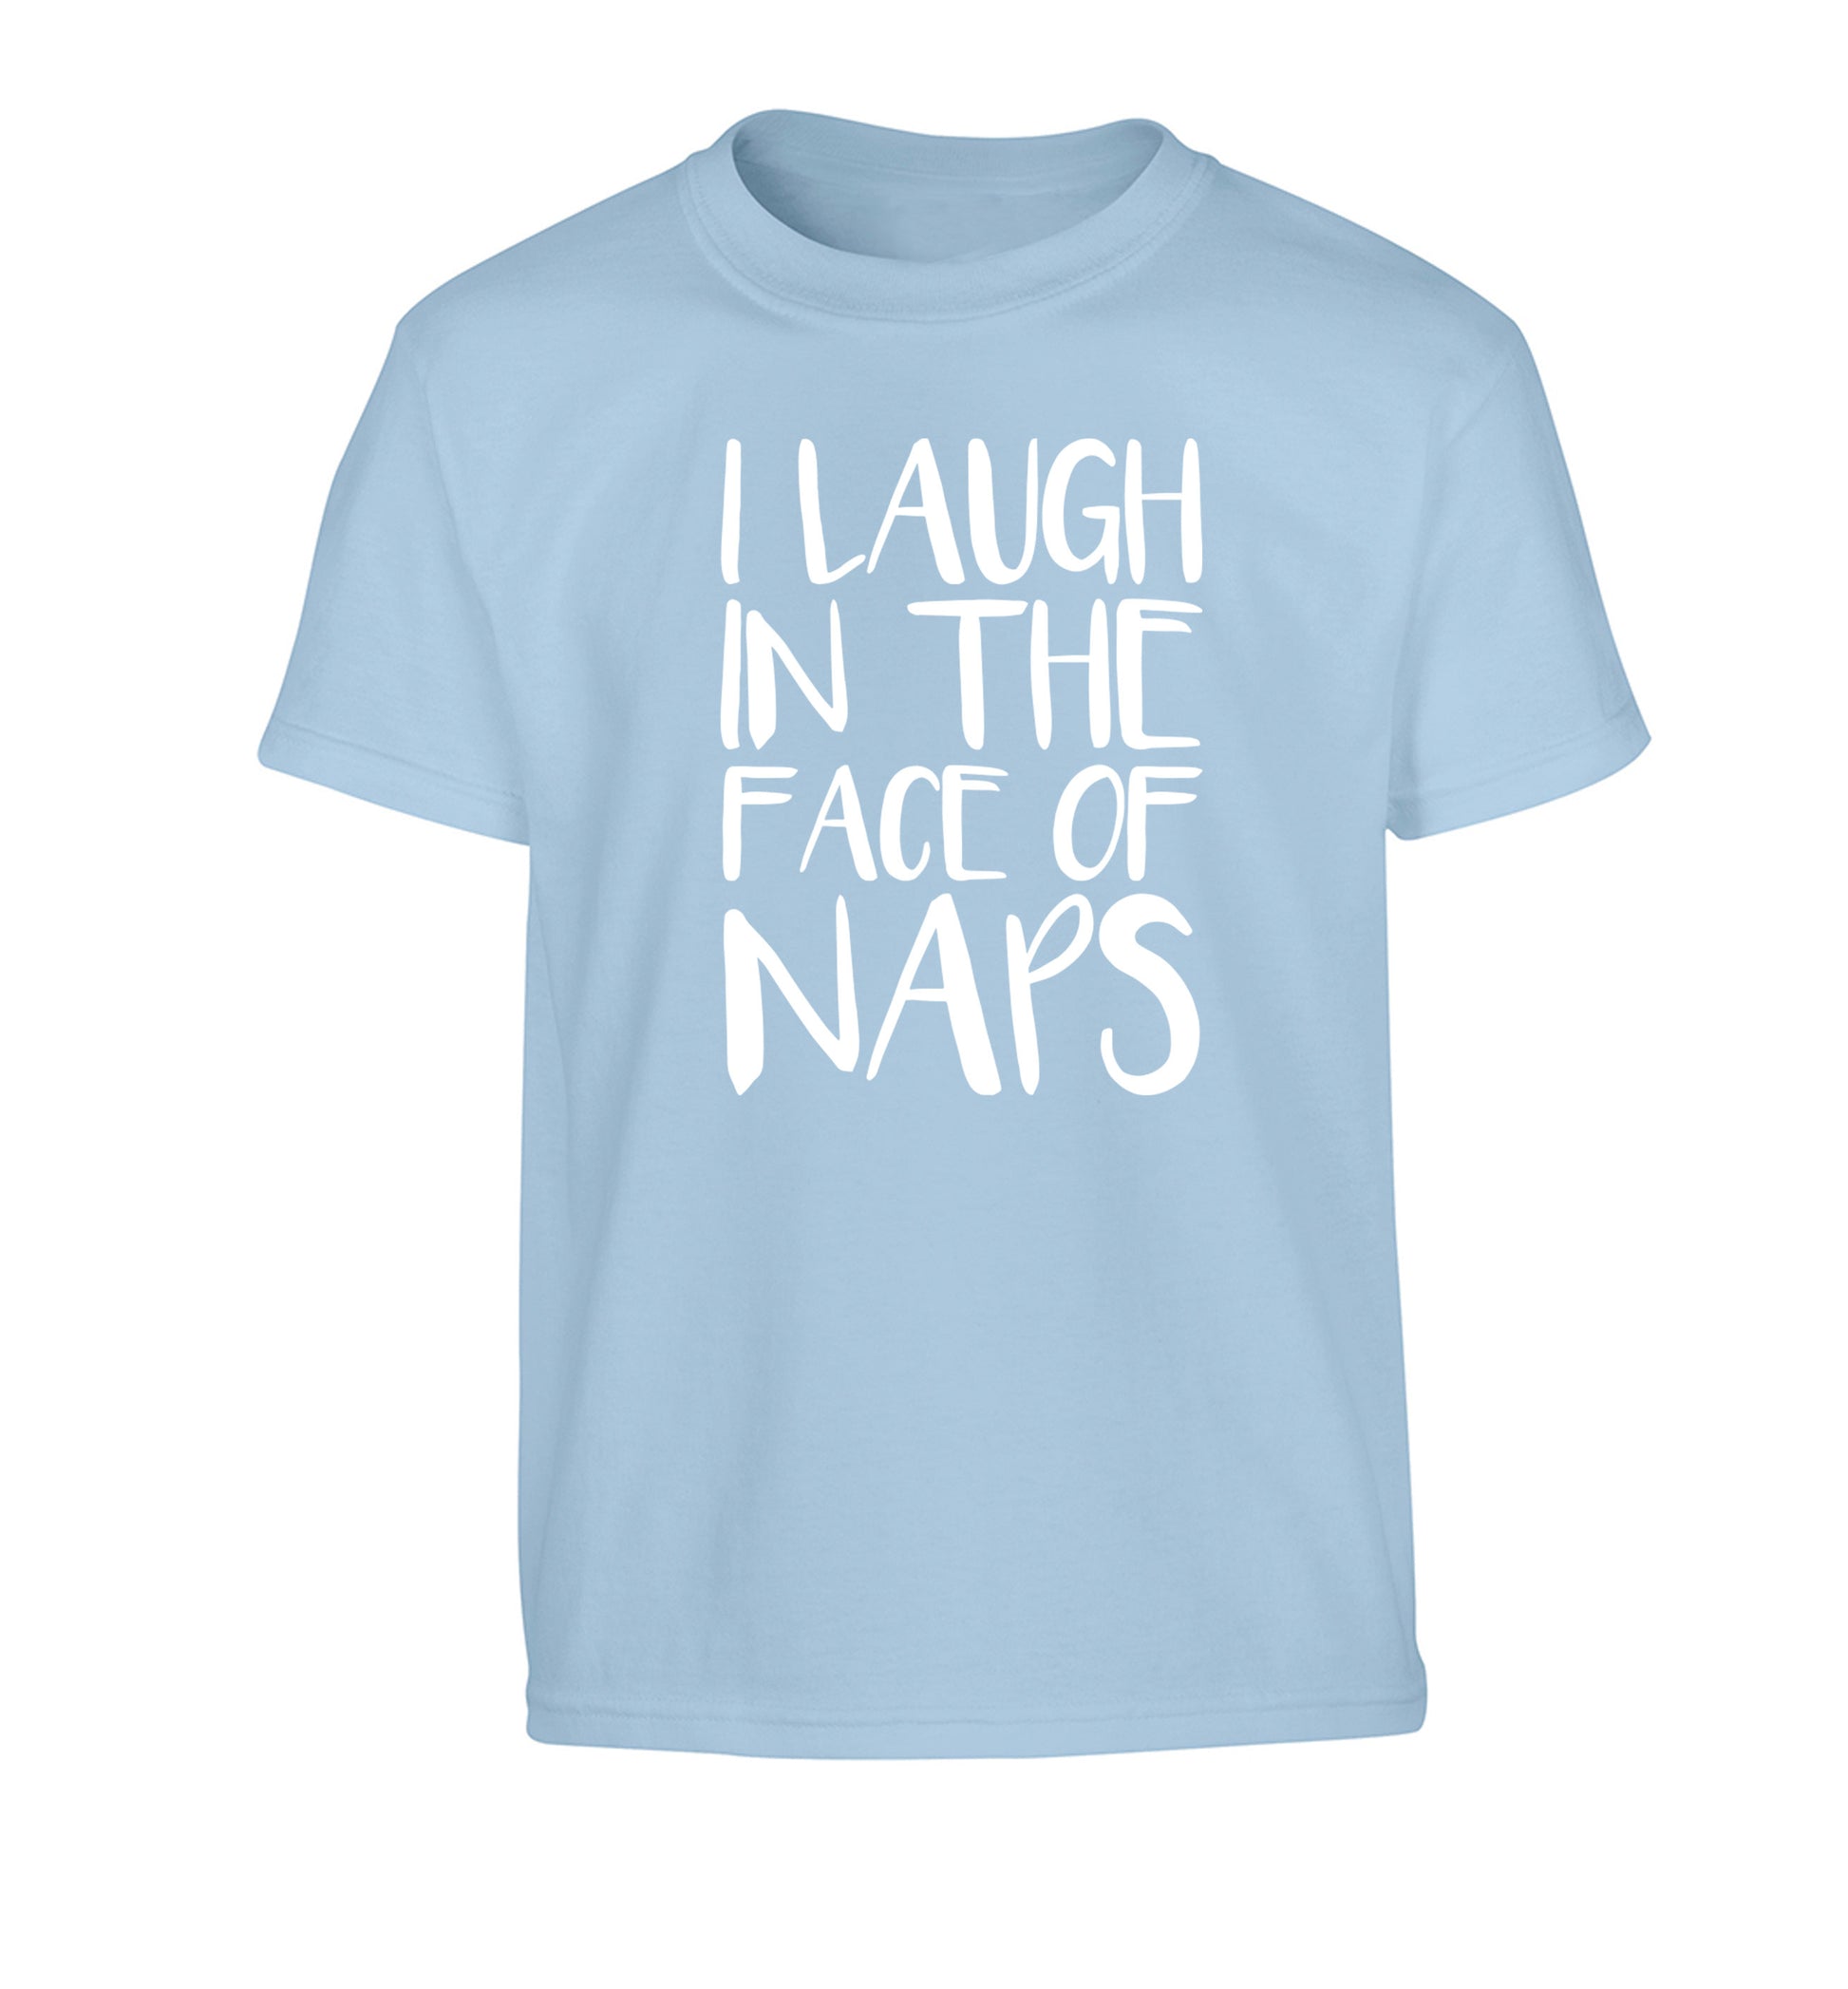 I laugh in the face of naps Children's light blue Tshirt 12-14 Years